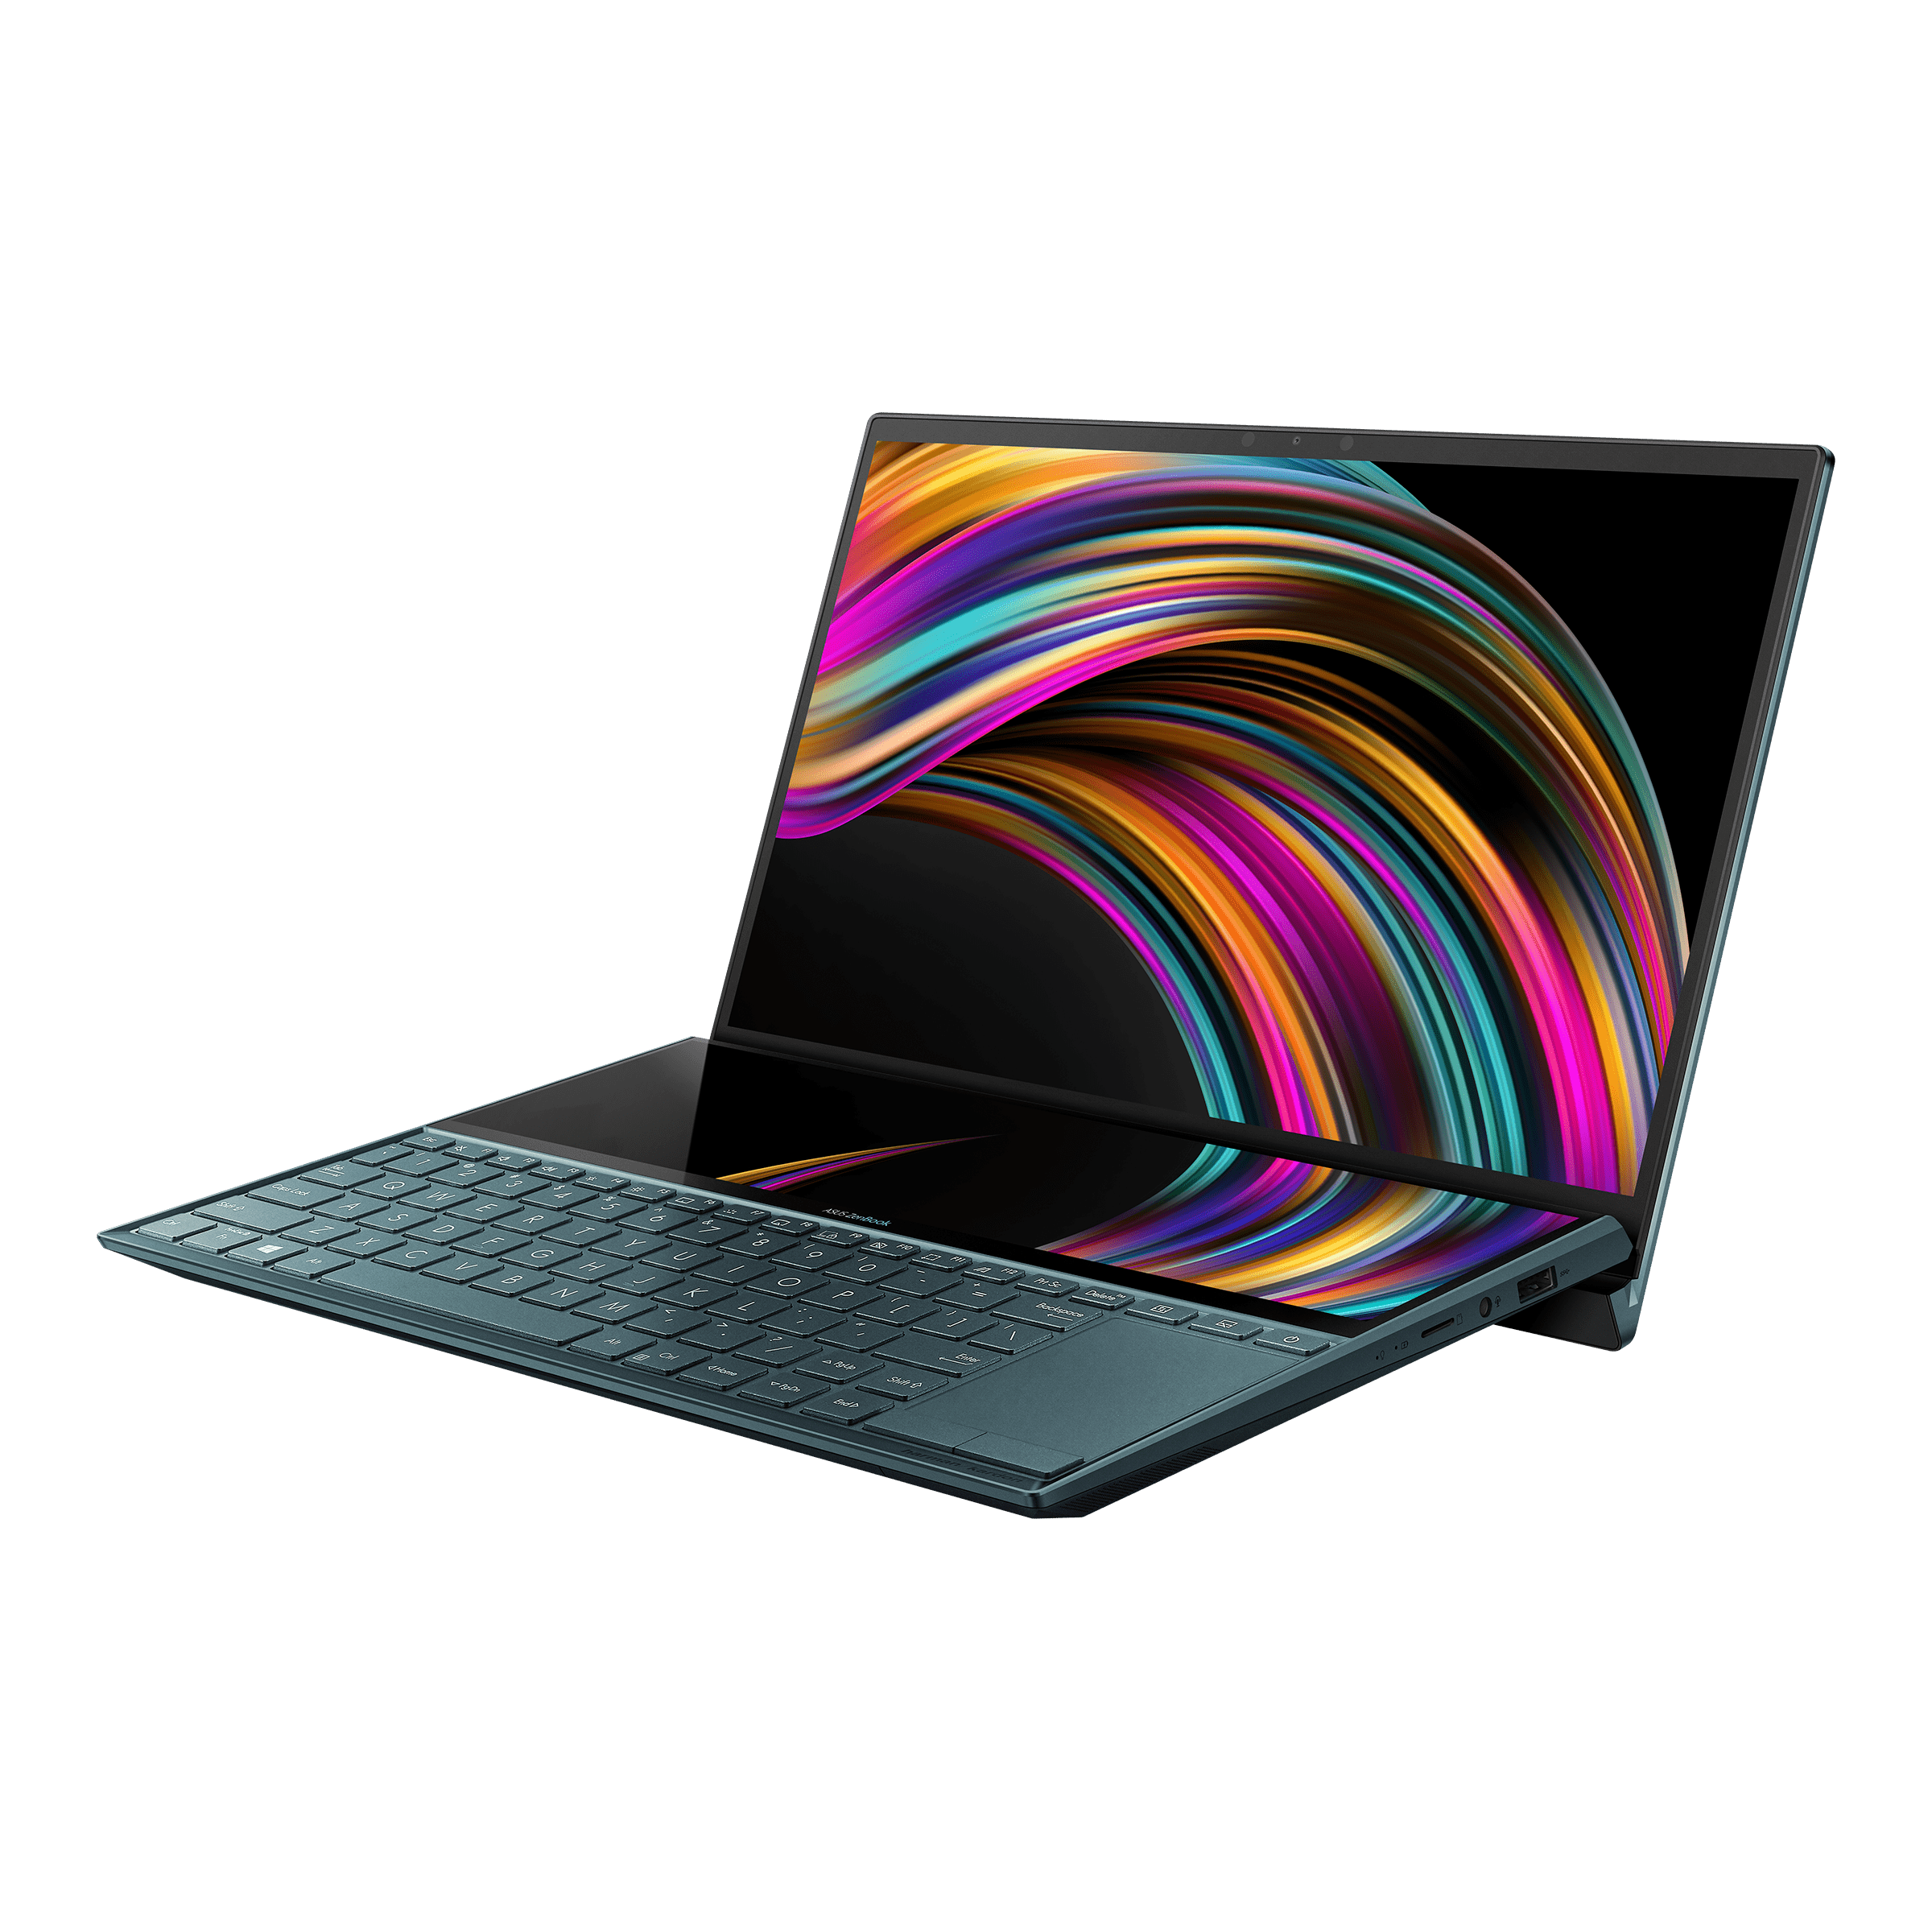 Zenbook Duo UX481｜Laptops For Home｜ASUS Global